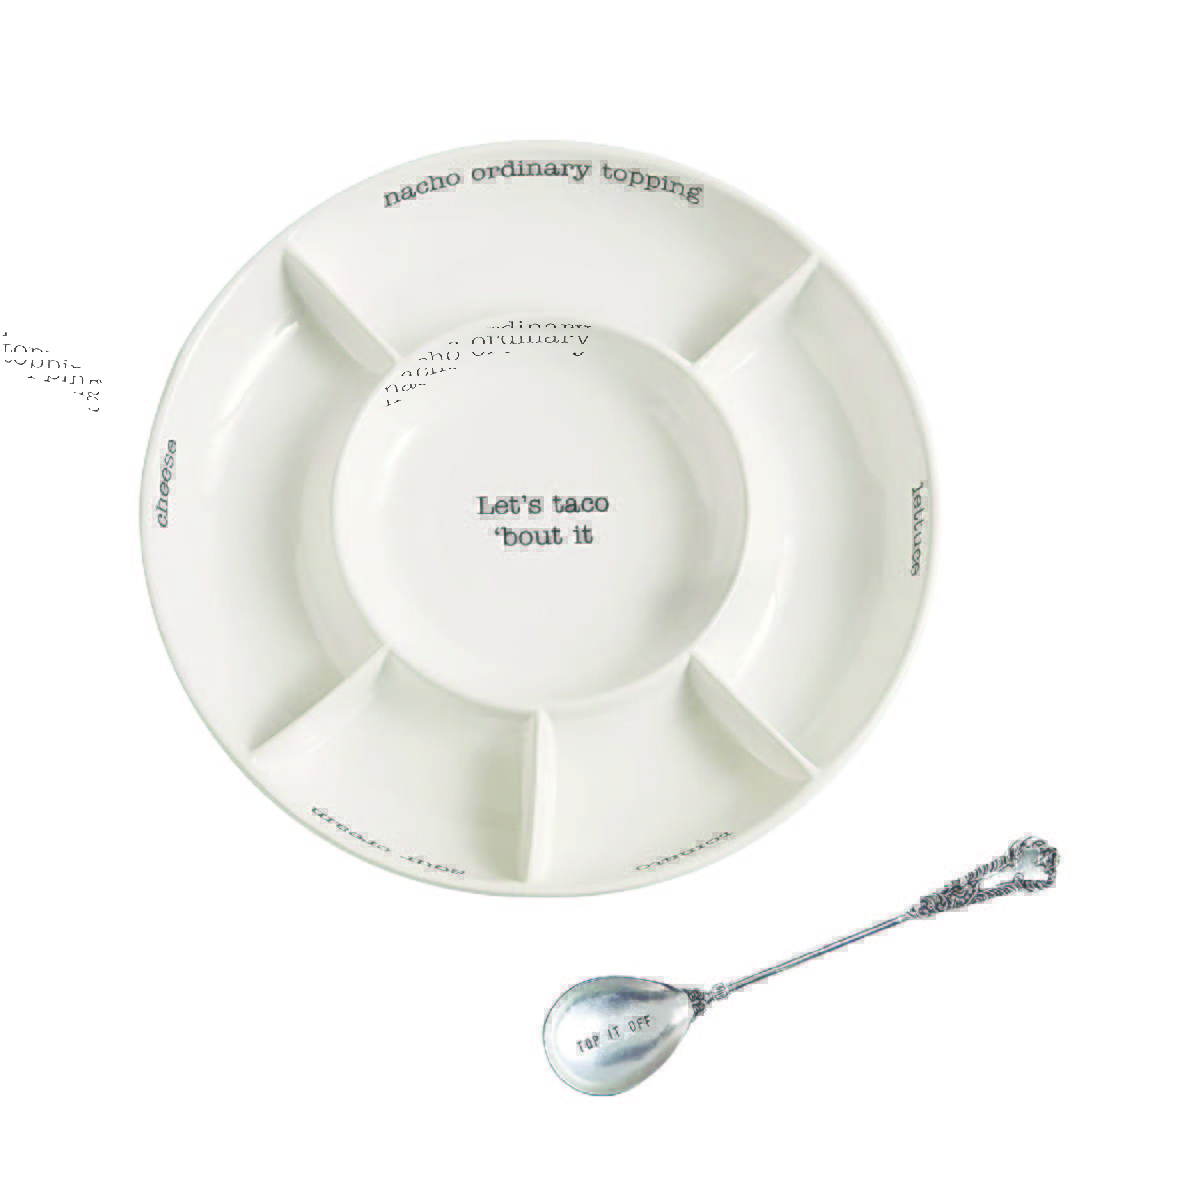 A white platter with labeled sections for different taco toppings and a stainless steel serving spoon on the side.